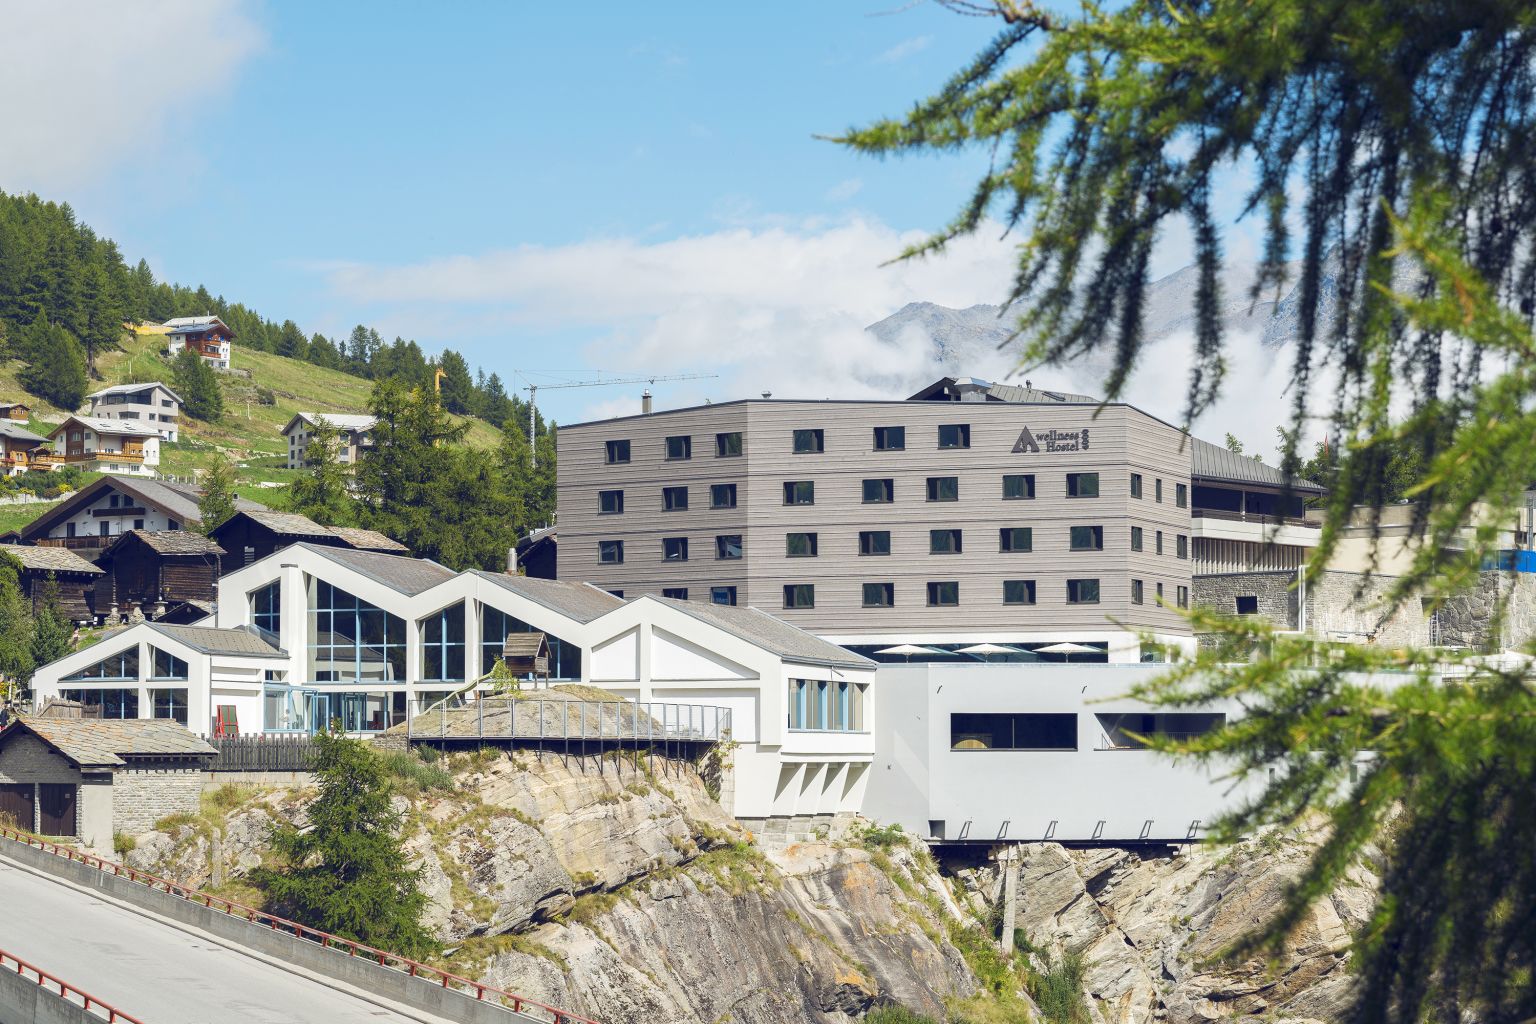 A world first for the glacier village of Saas-Fee. The hostel combines the typical laidback ambiance and low prices of a youth hostel with the exacting requirements of modern wellness and fitness facilities, Valais